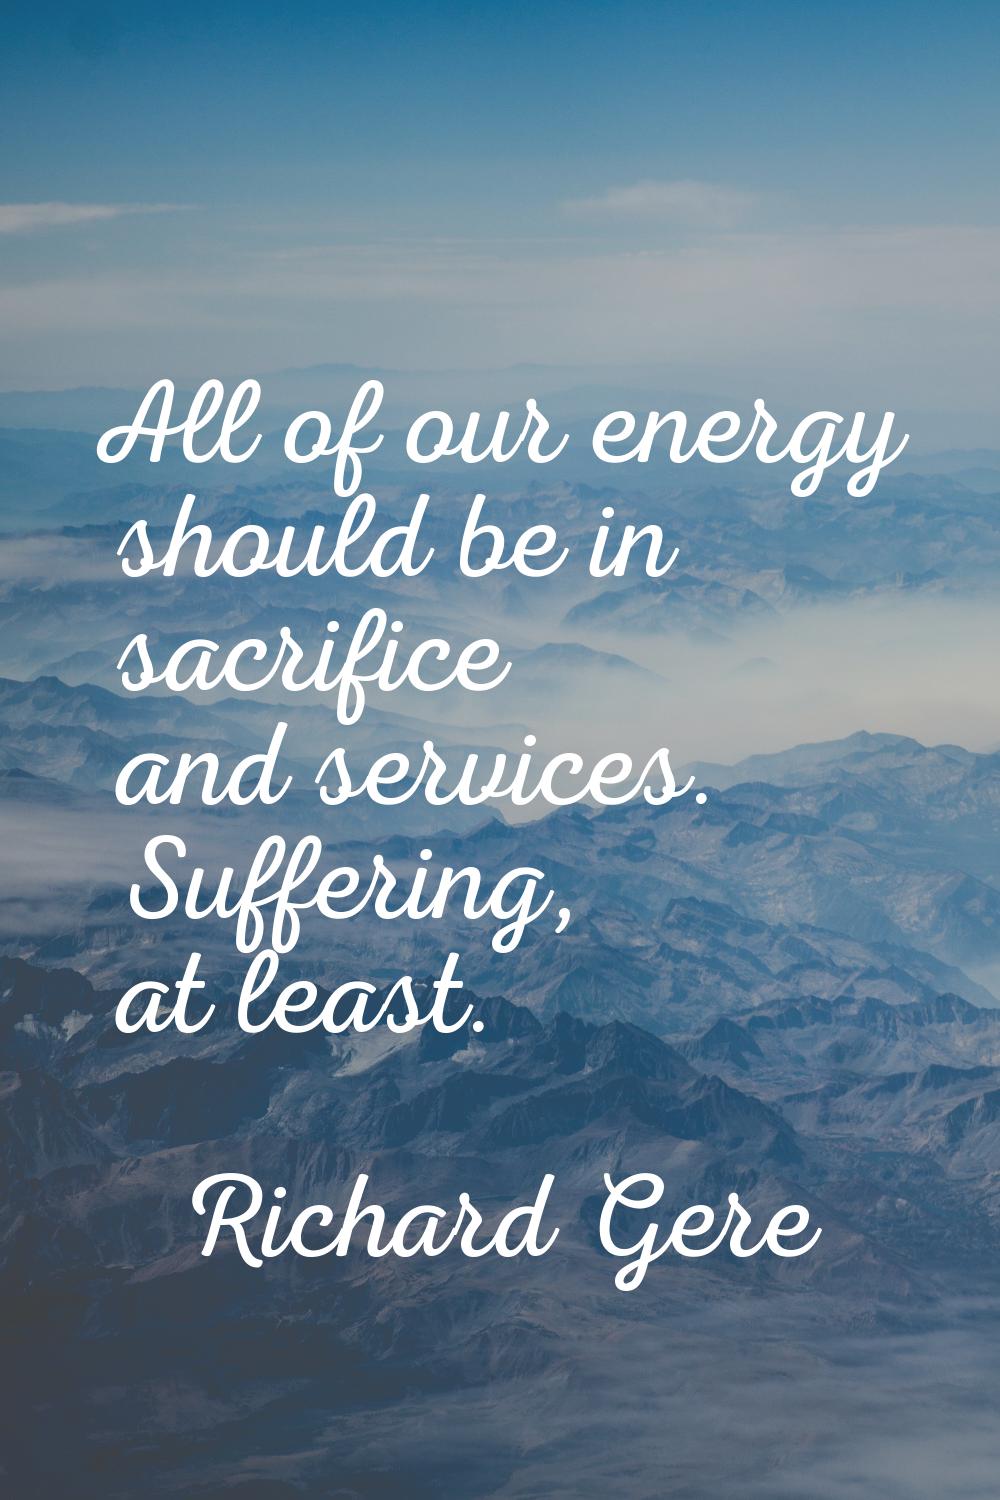 All of our energy should be in sacrifice and services. Suffering, at least.